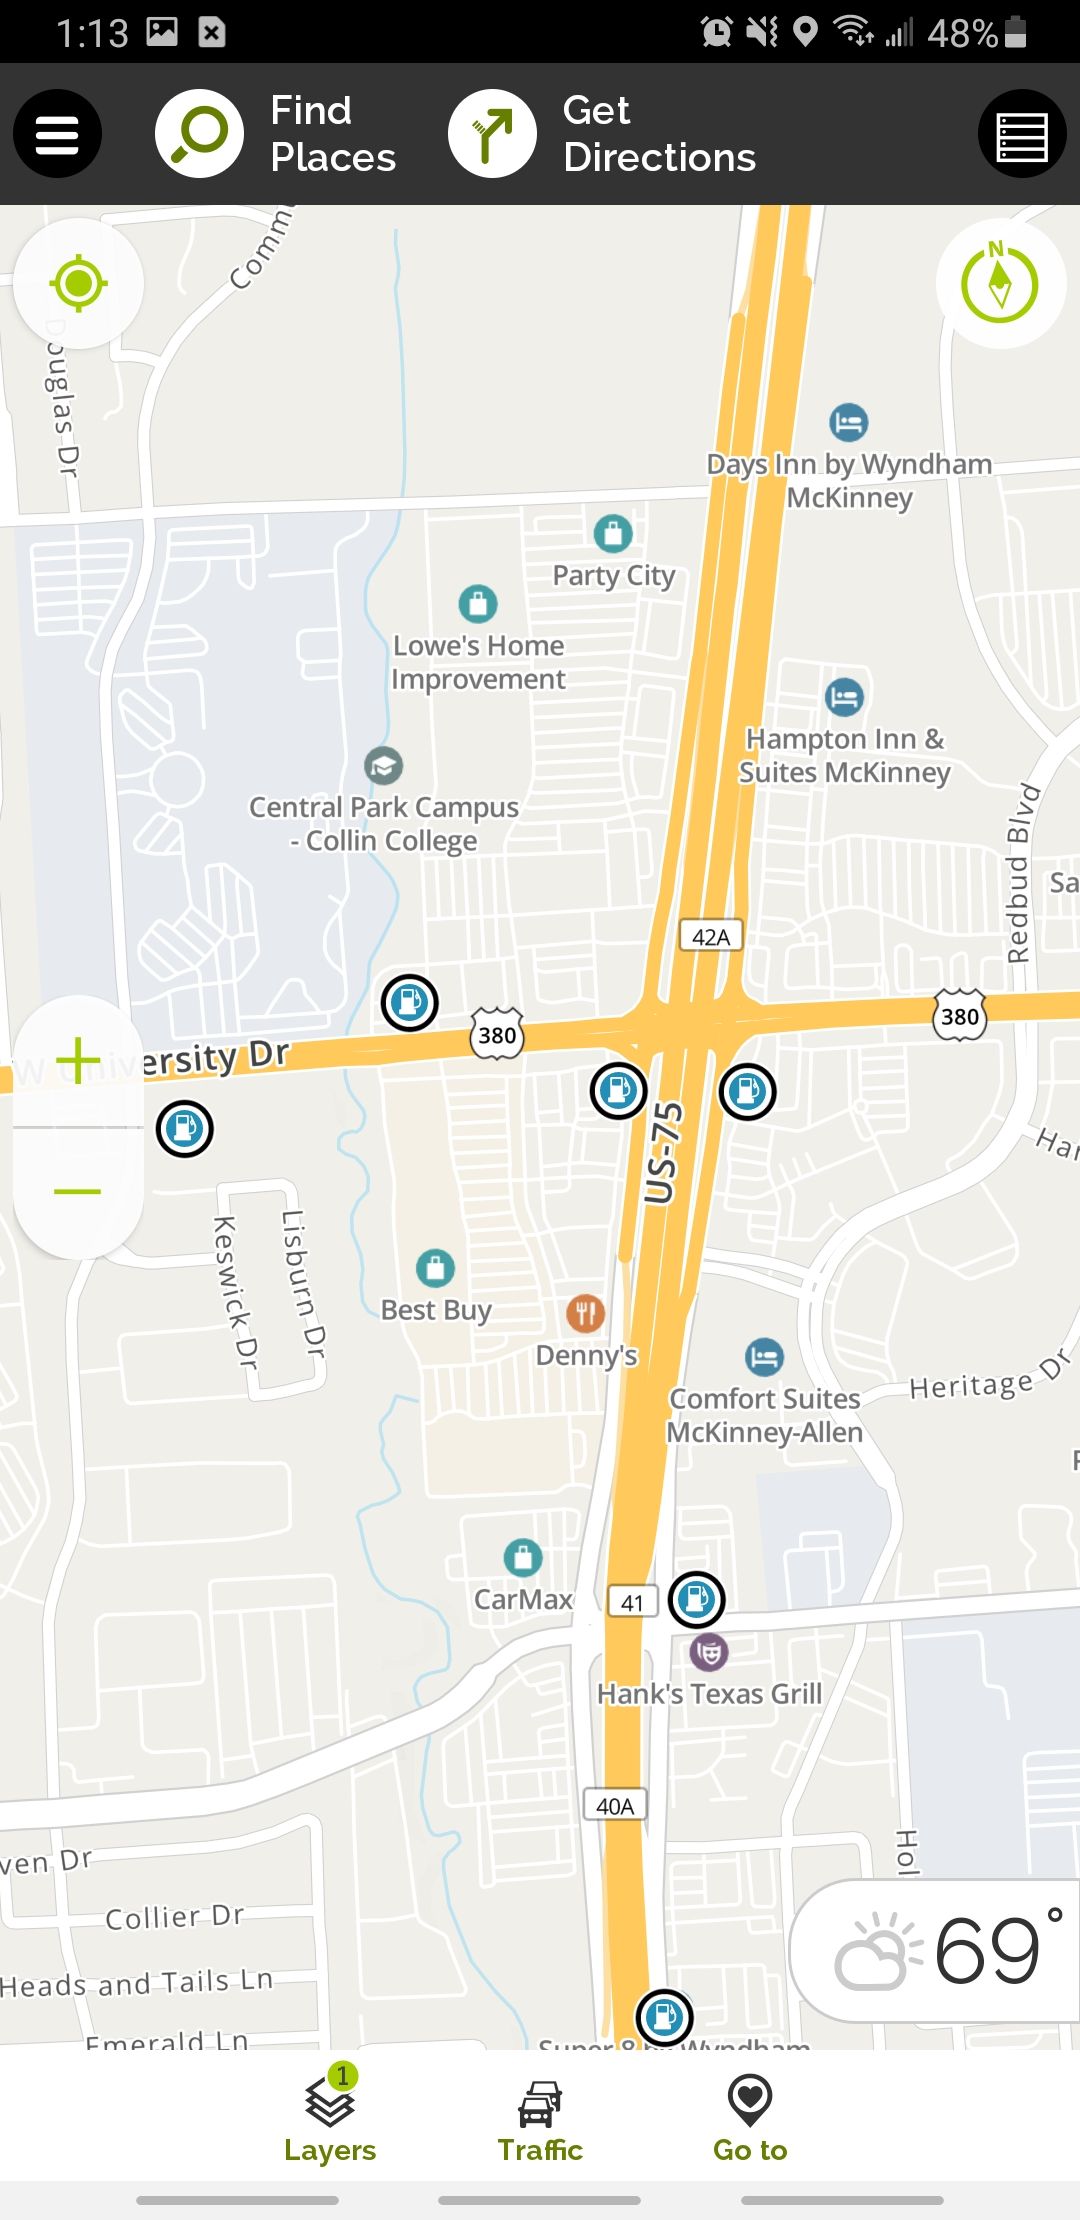 mapquest app showing nearby gas stations in map view